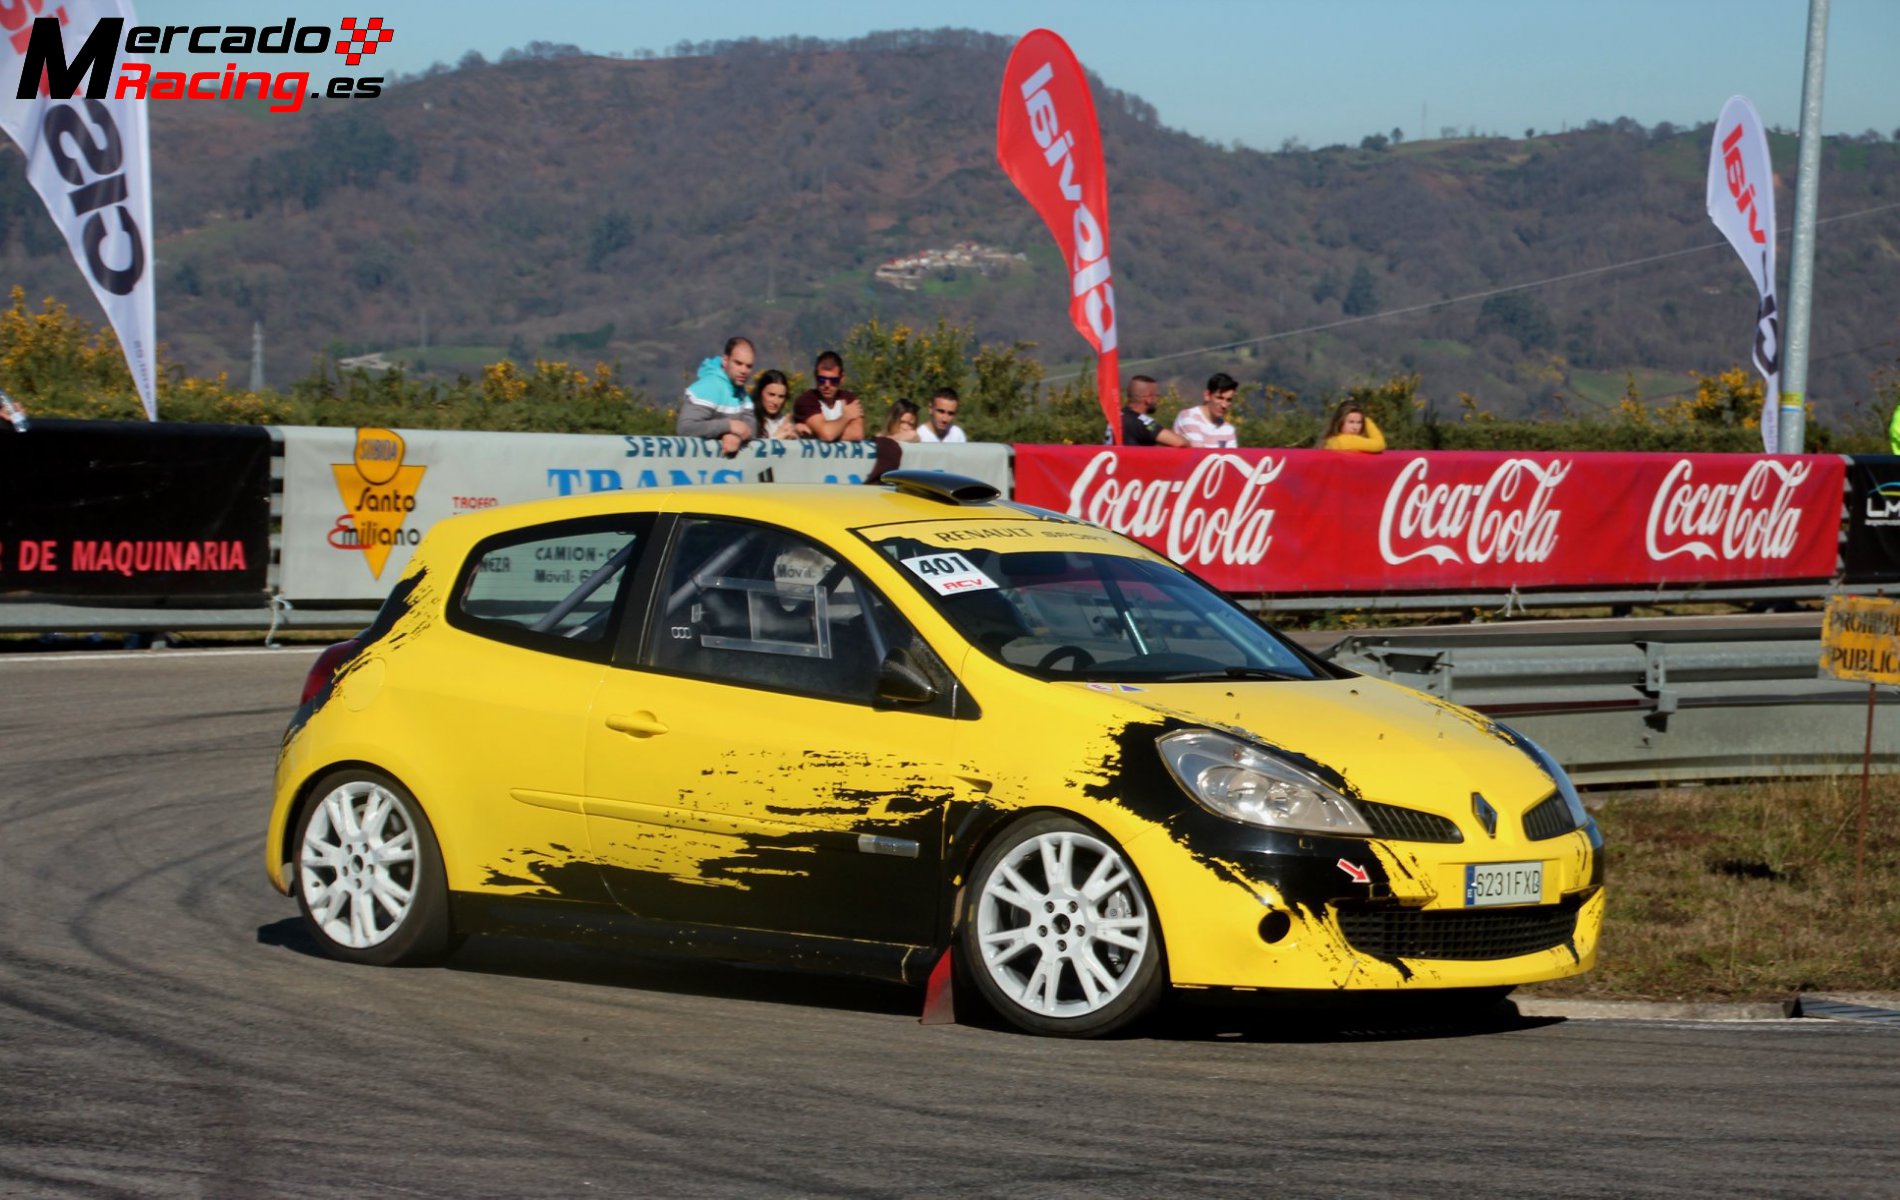 Renault clio 3 rally 